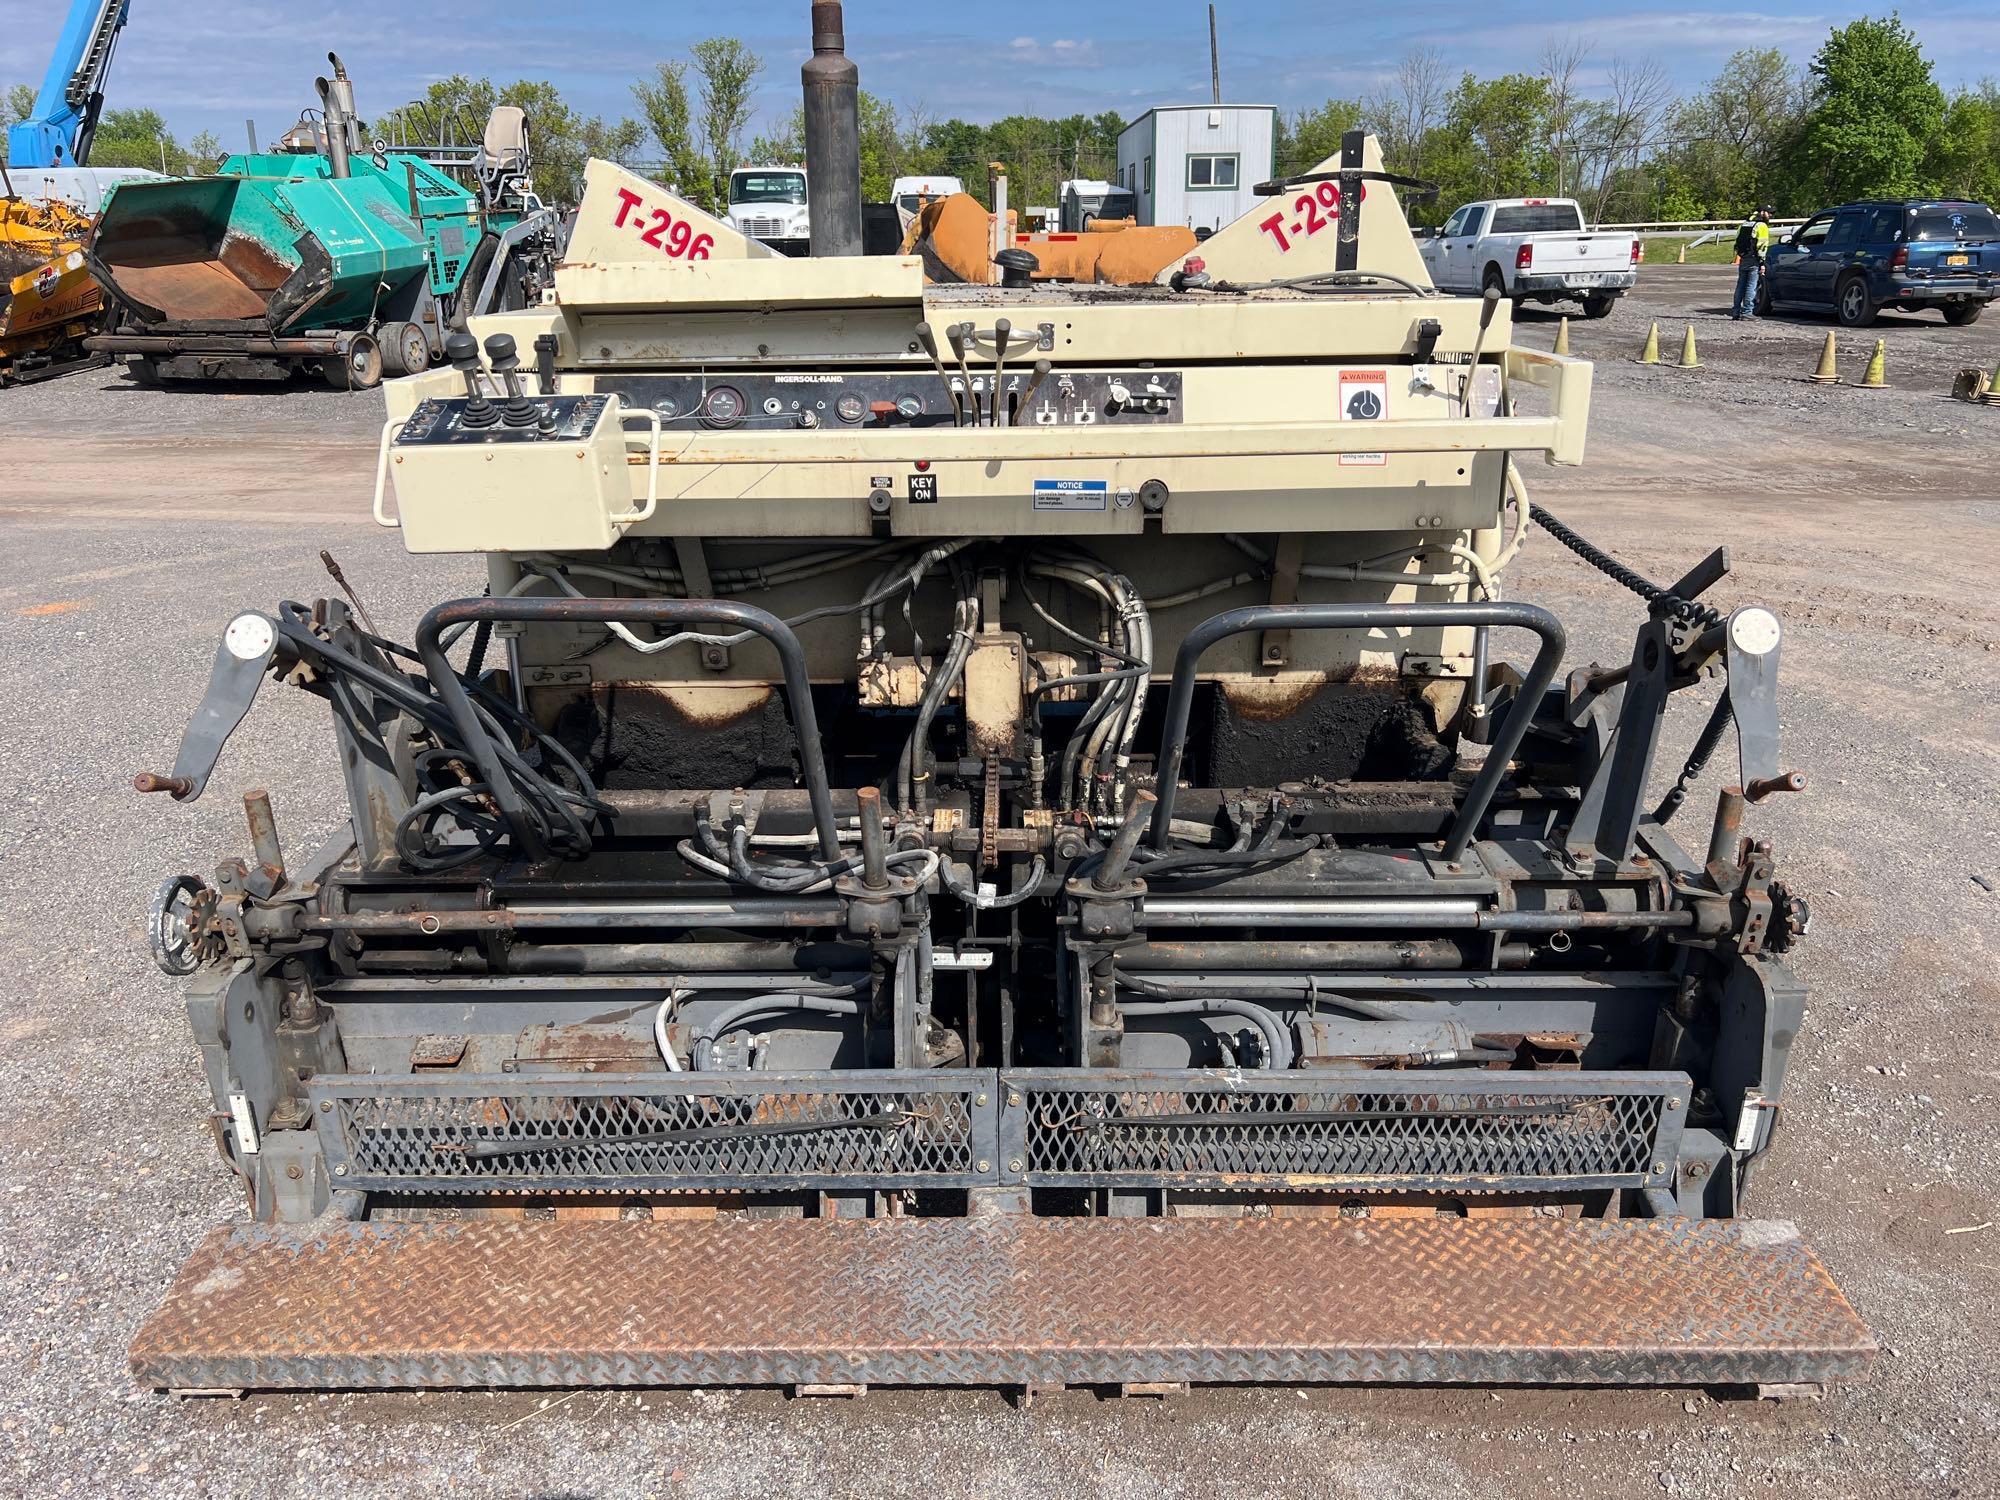 INGERSOLL RAND 575T ASPHALT PAVER SN:136092 powered by Kubota diesel engine, equipped with propane